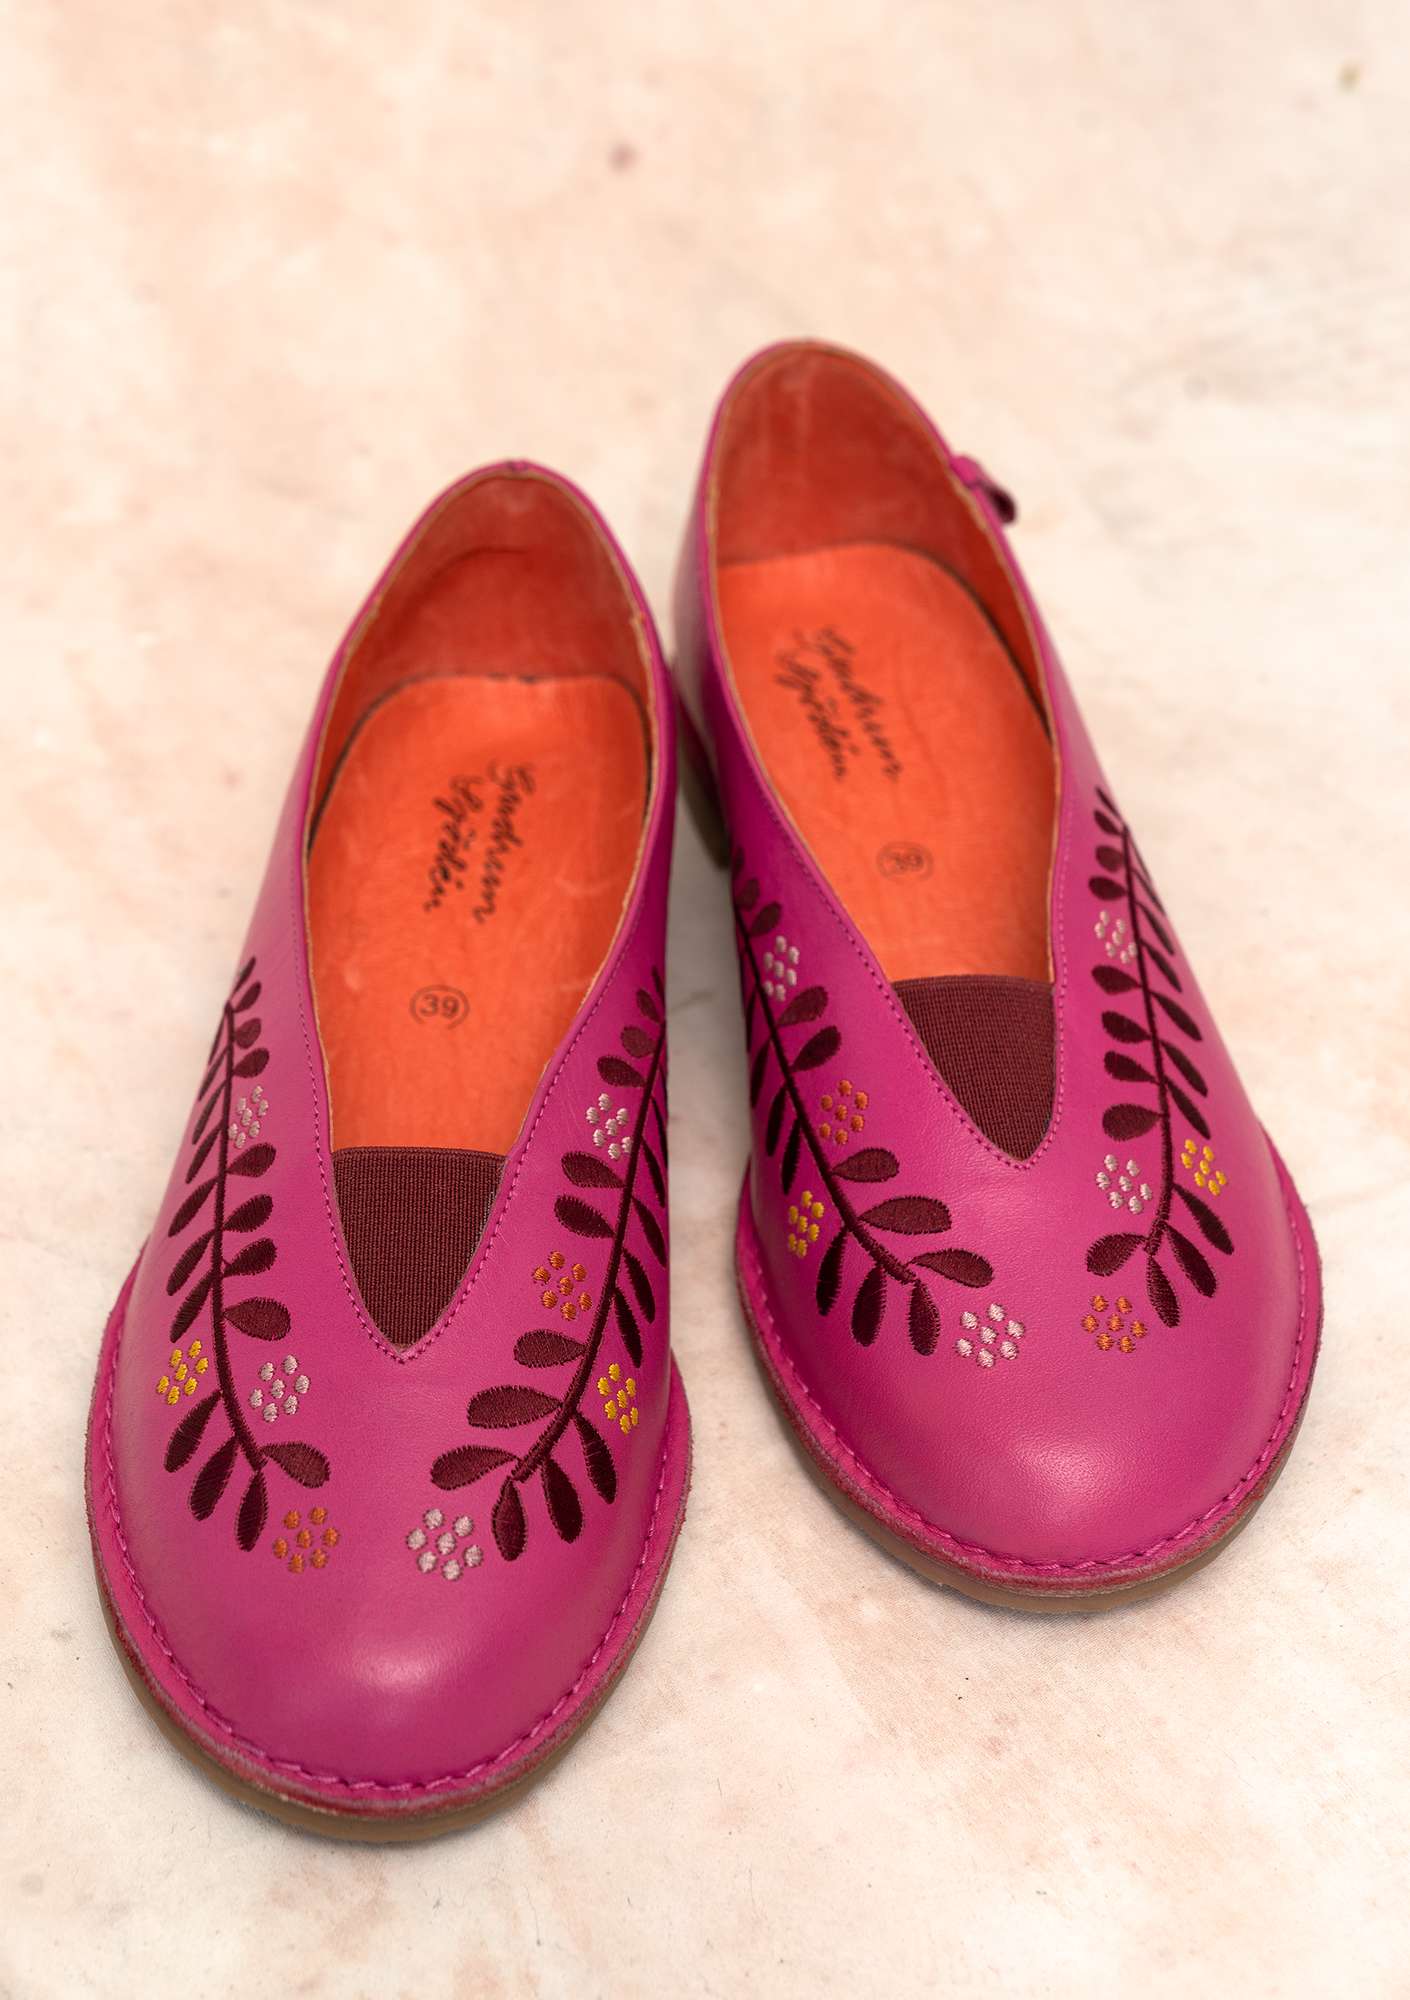 Chaussures ¨Lily¨ en cuir nappa hibiscus thumbnail